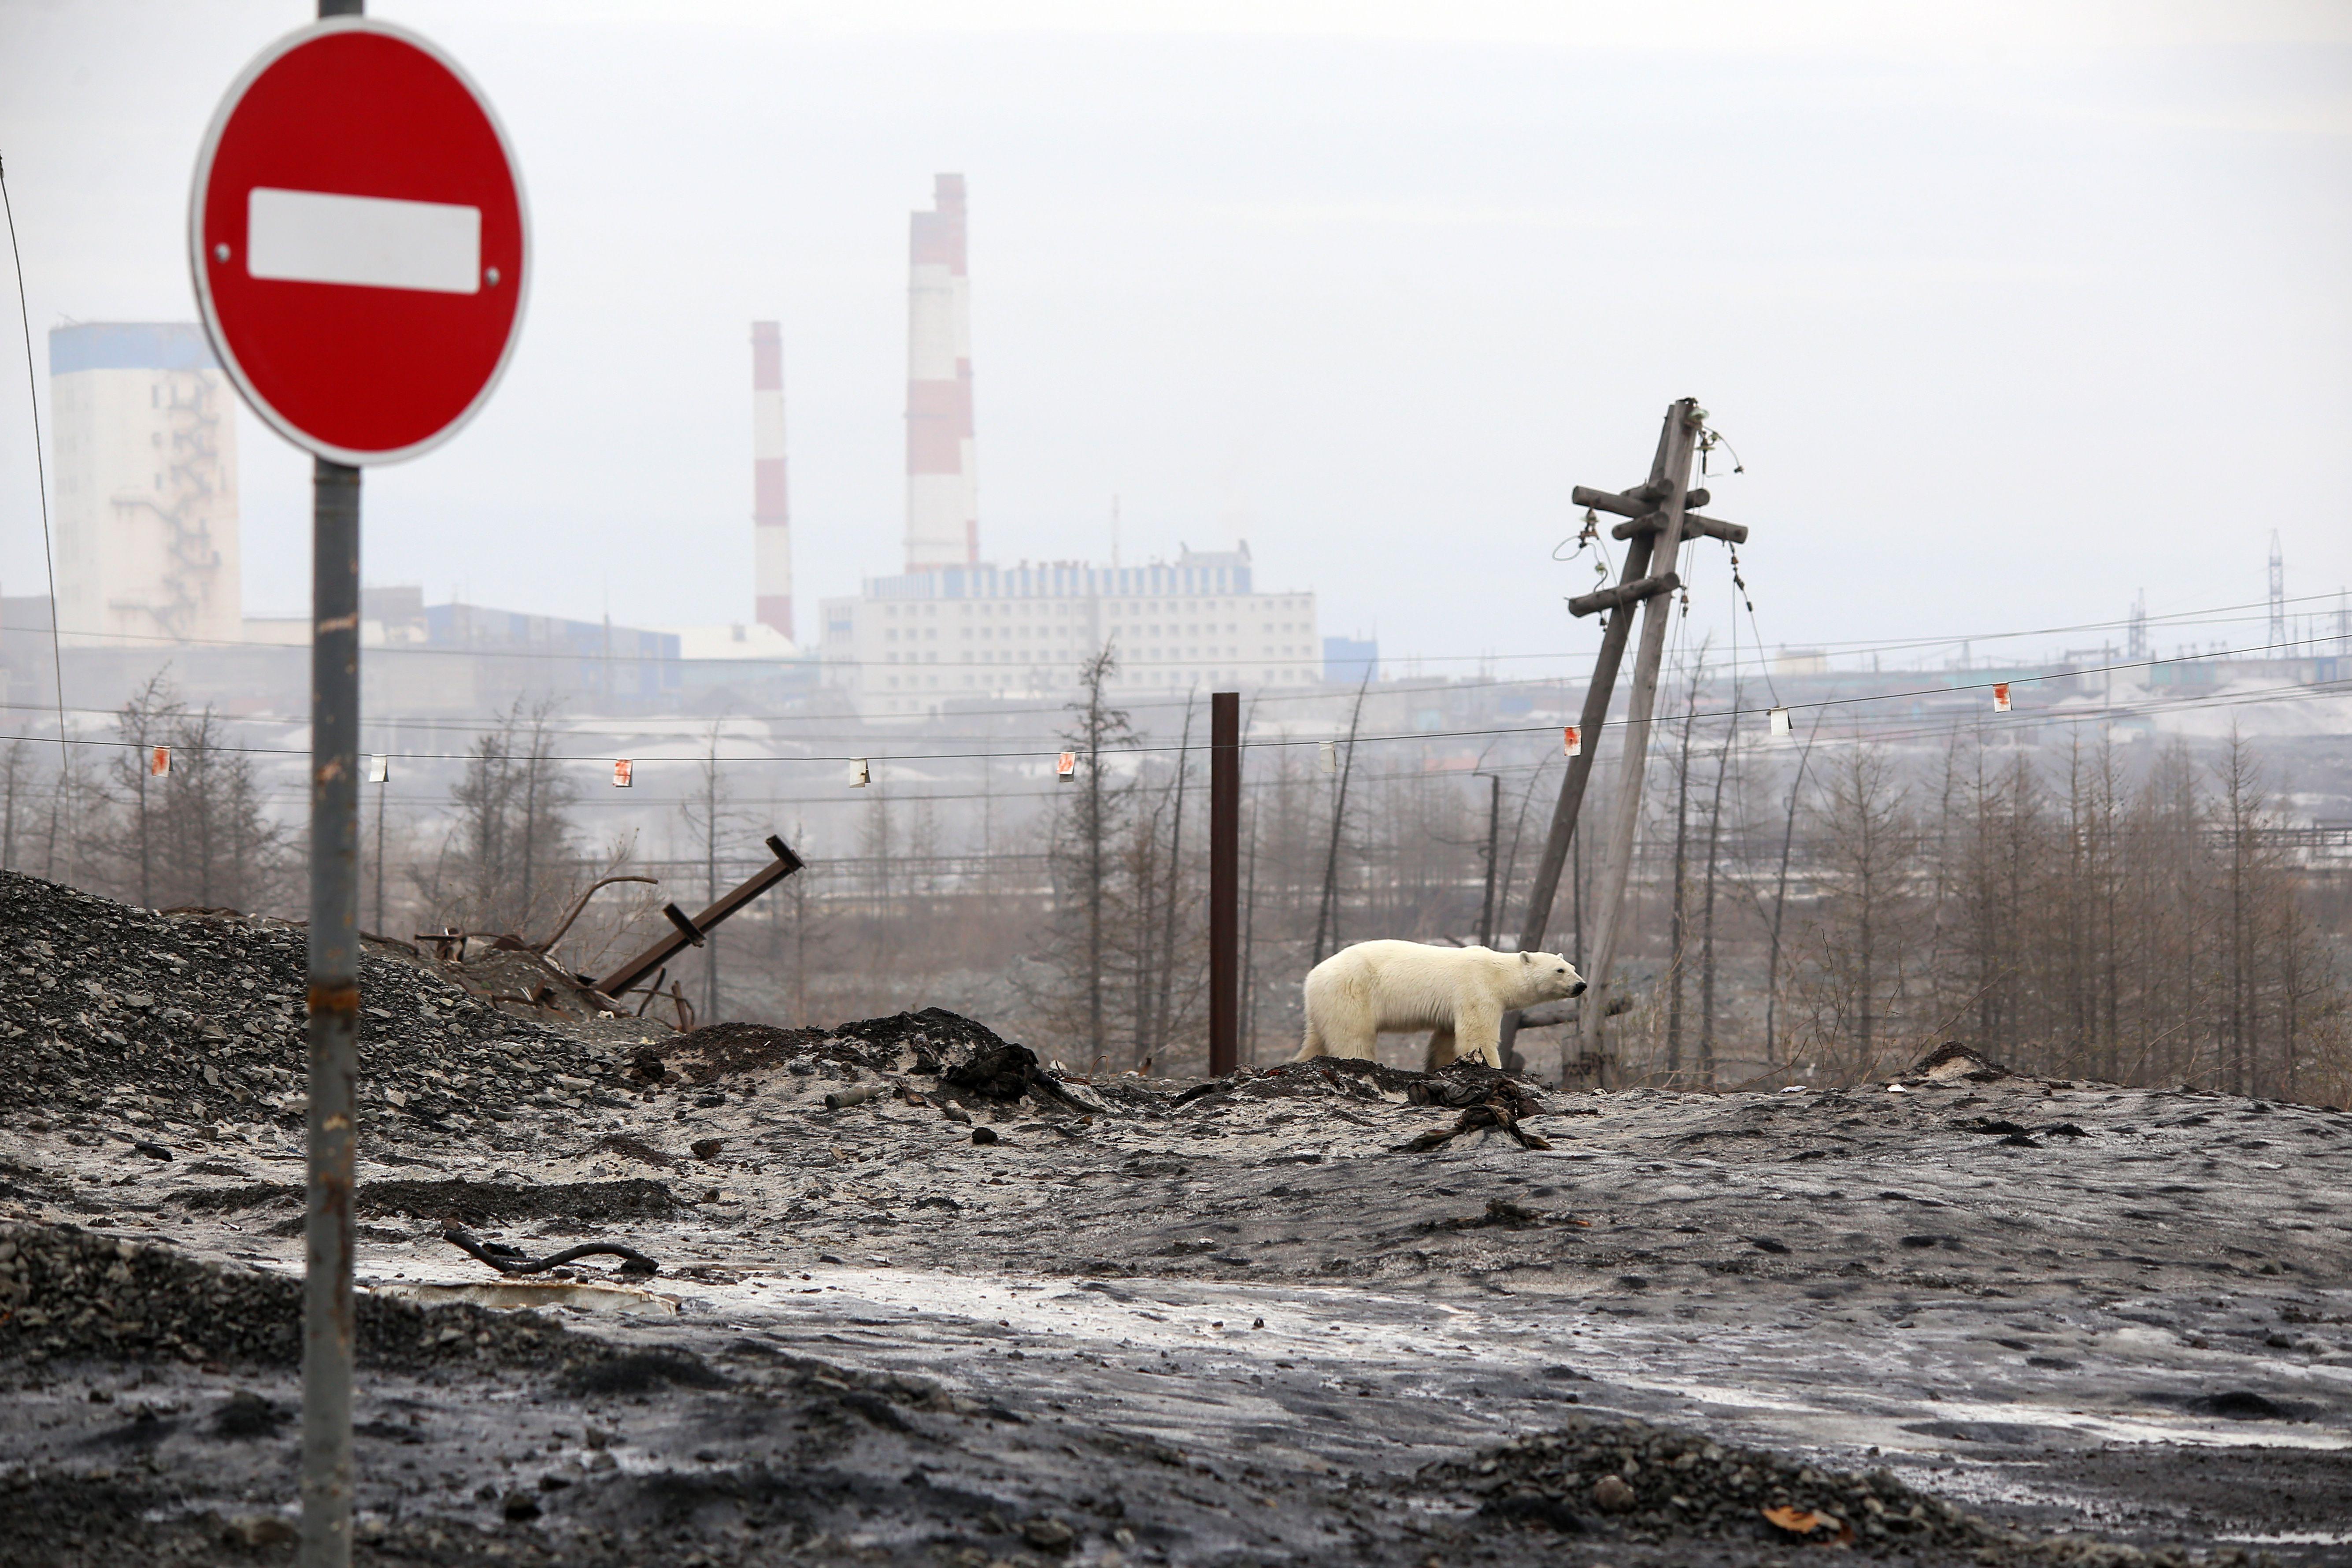 A stray polar bear is seen on the outskirts of the city of Norilsk, Russia.